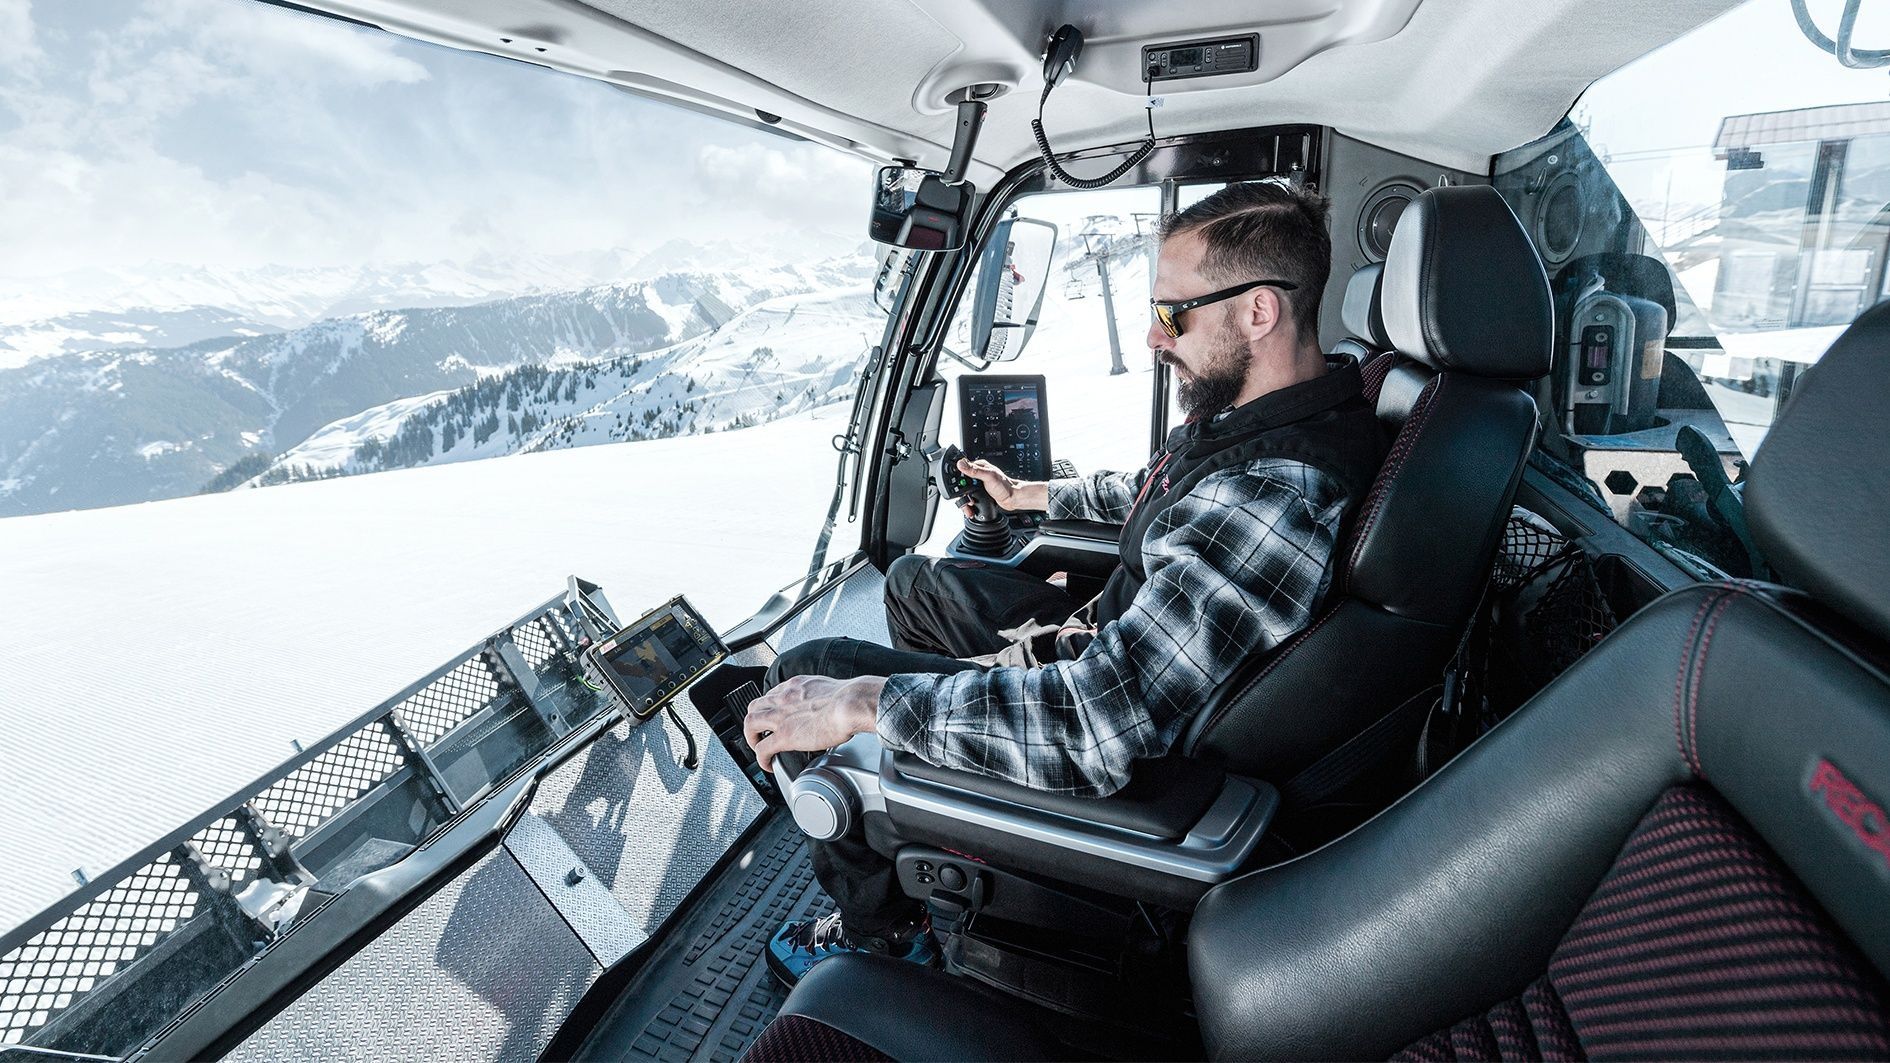 Man drives snow groomer in snow-covered mountains